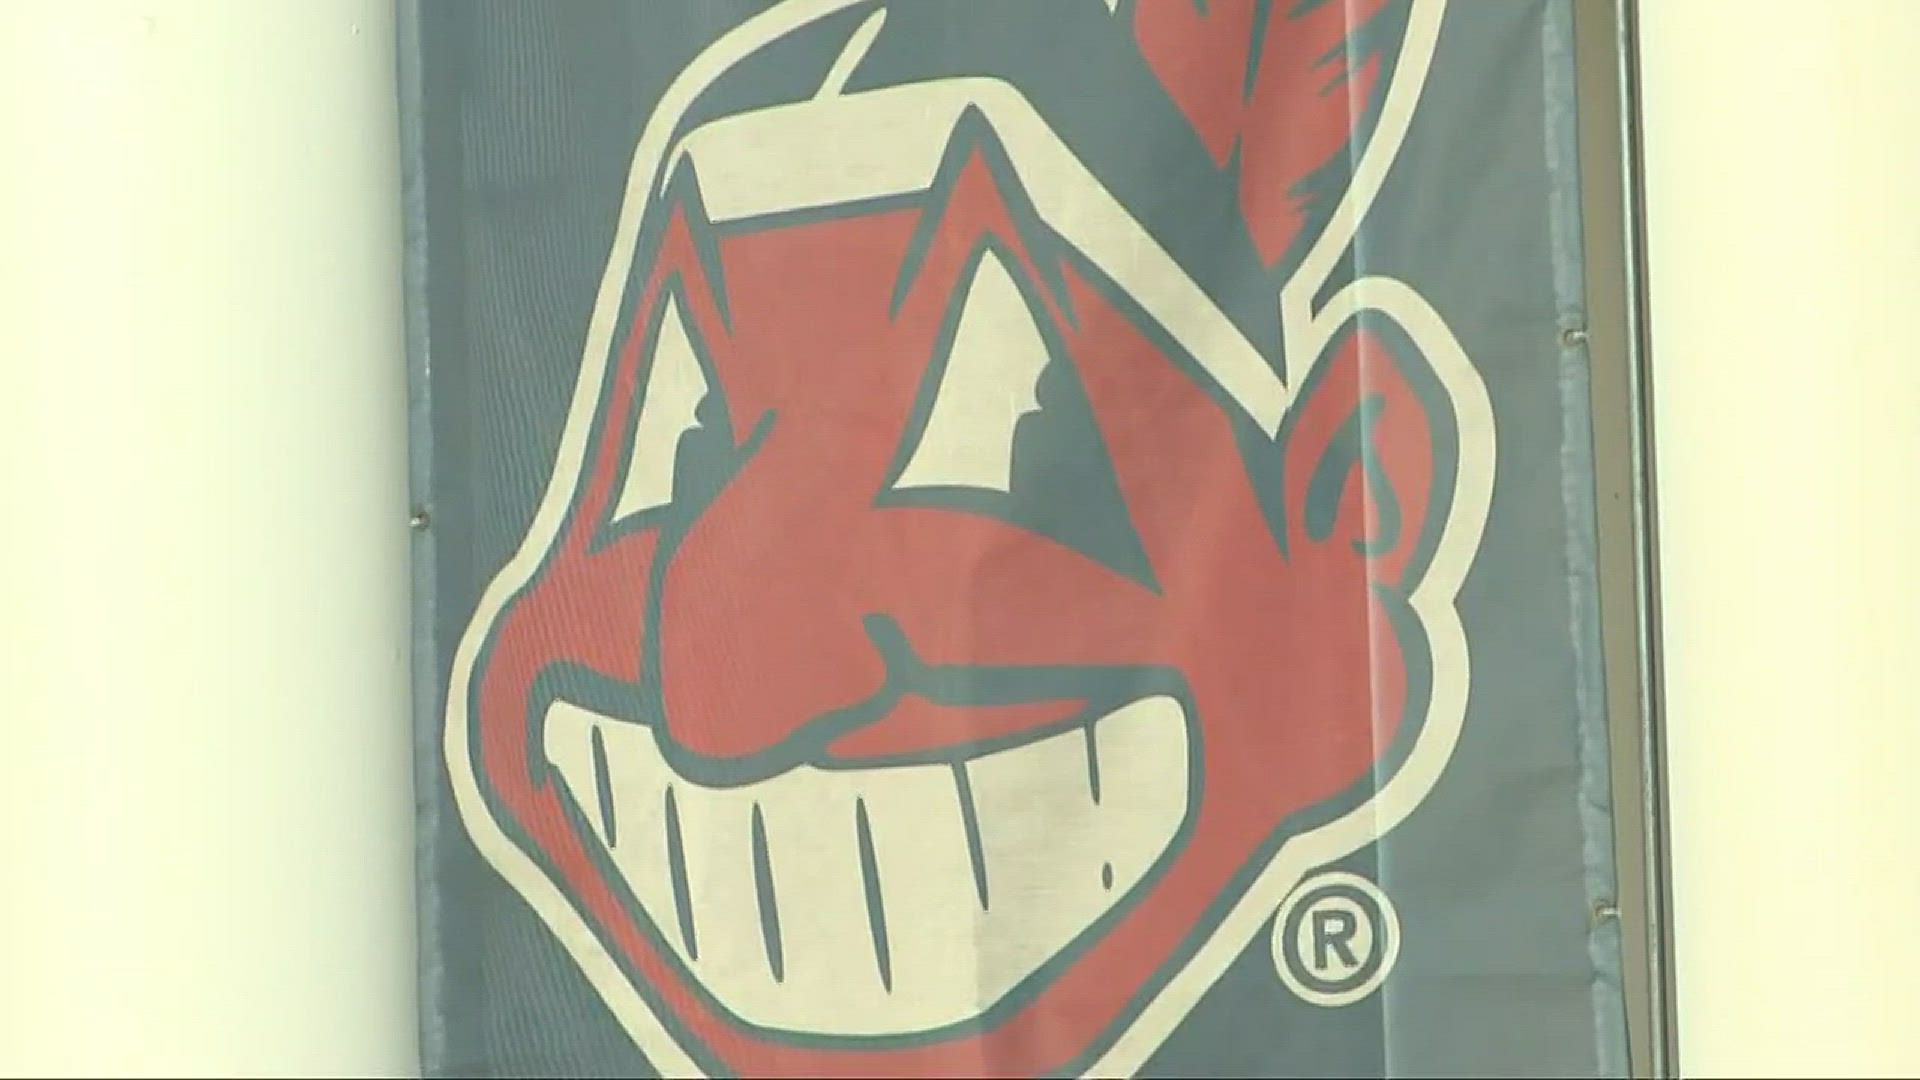 Even though it's been changed (for good reason), Chief Wahoo was